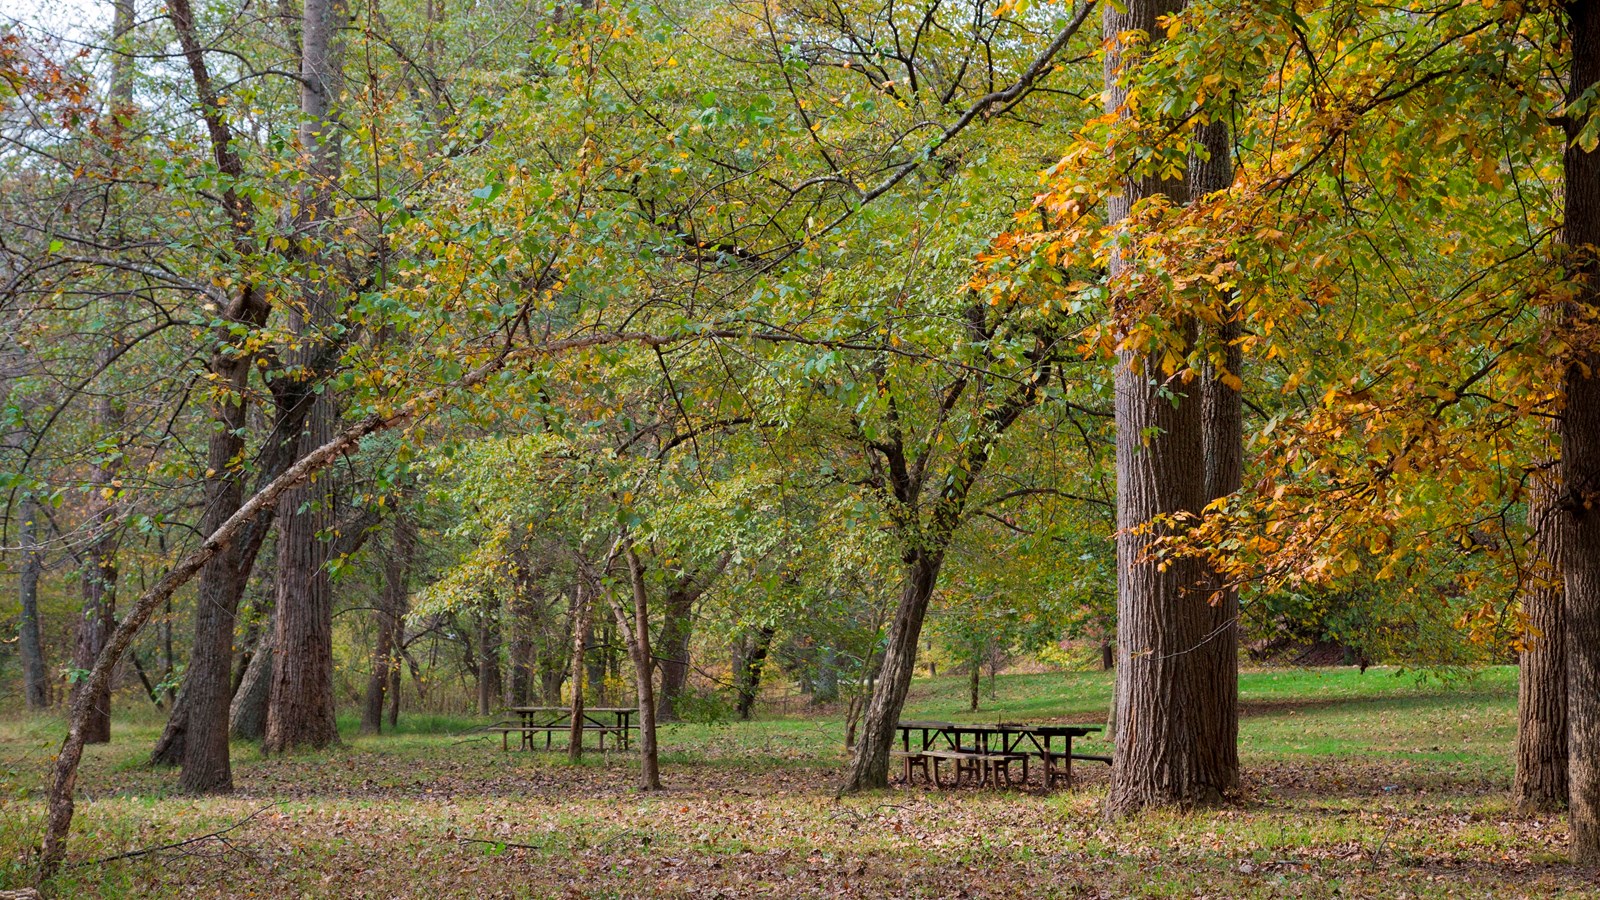 Tables beneath green leafy trees in a grassy space